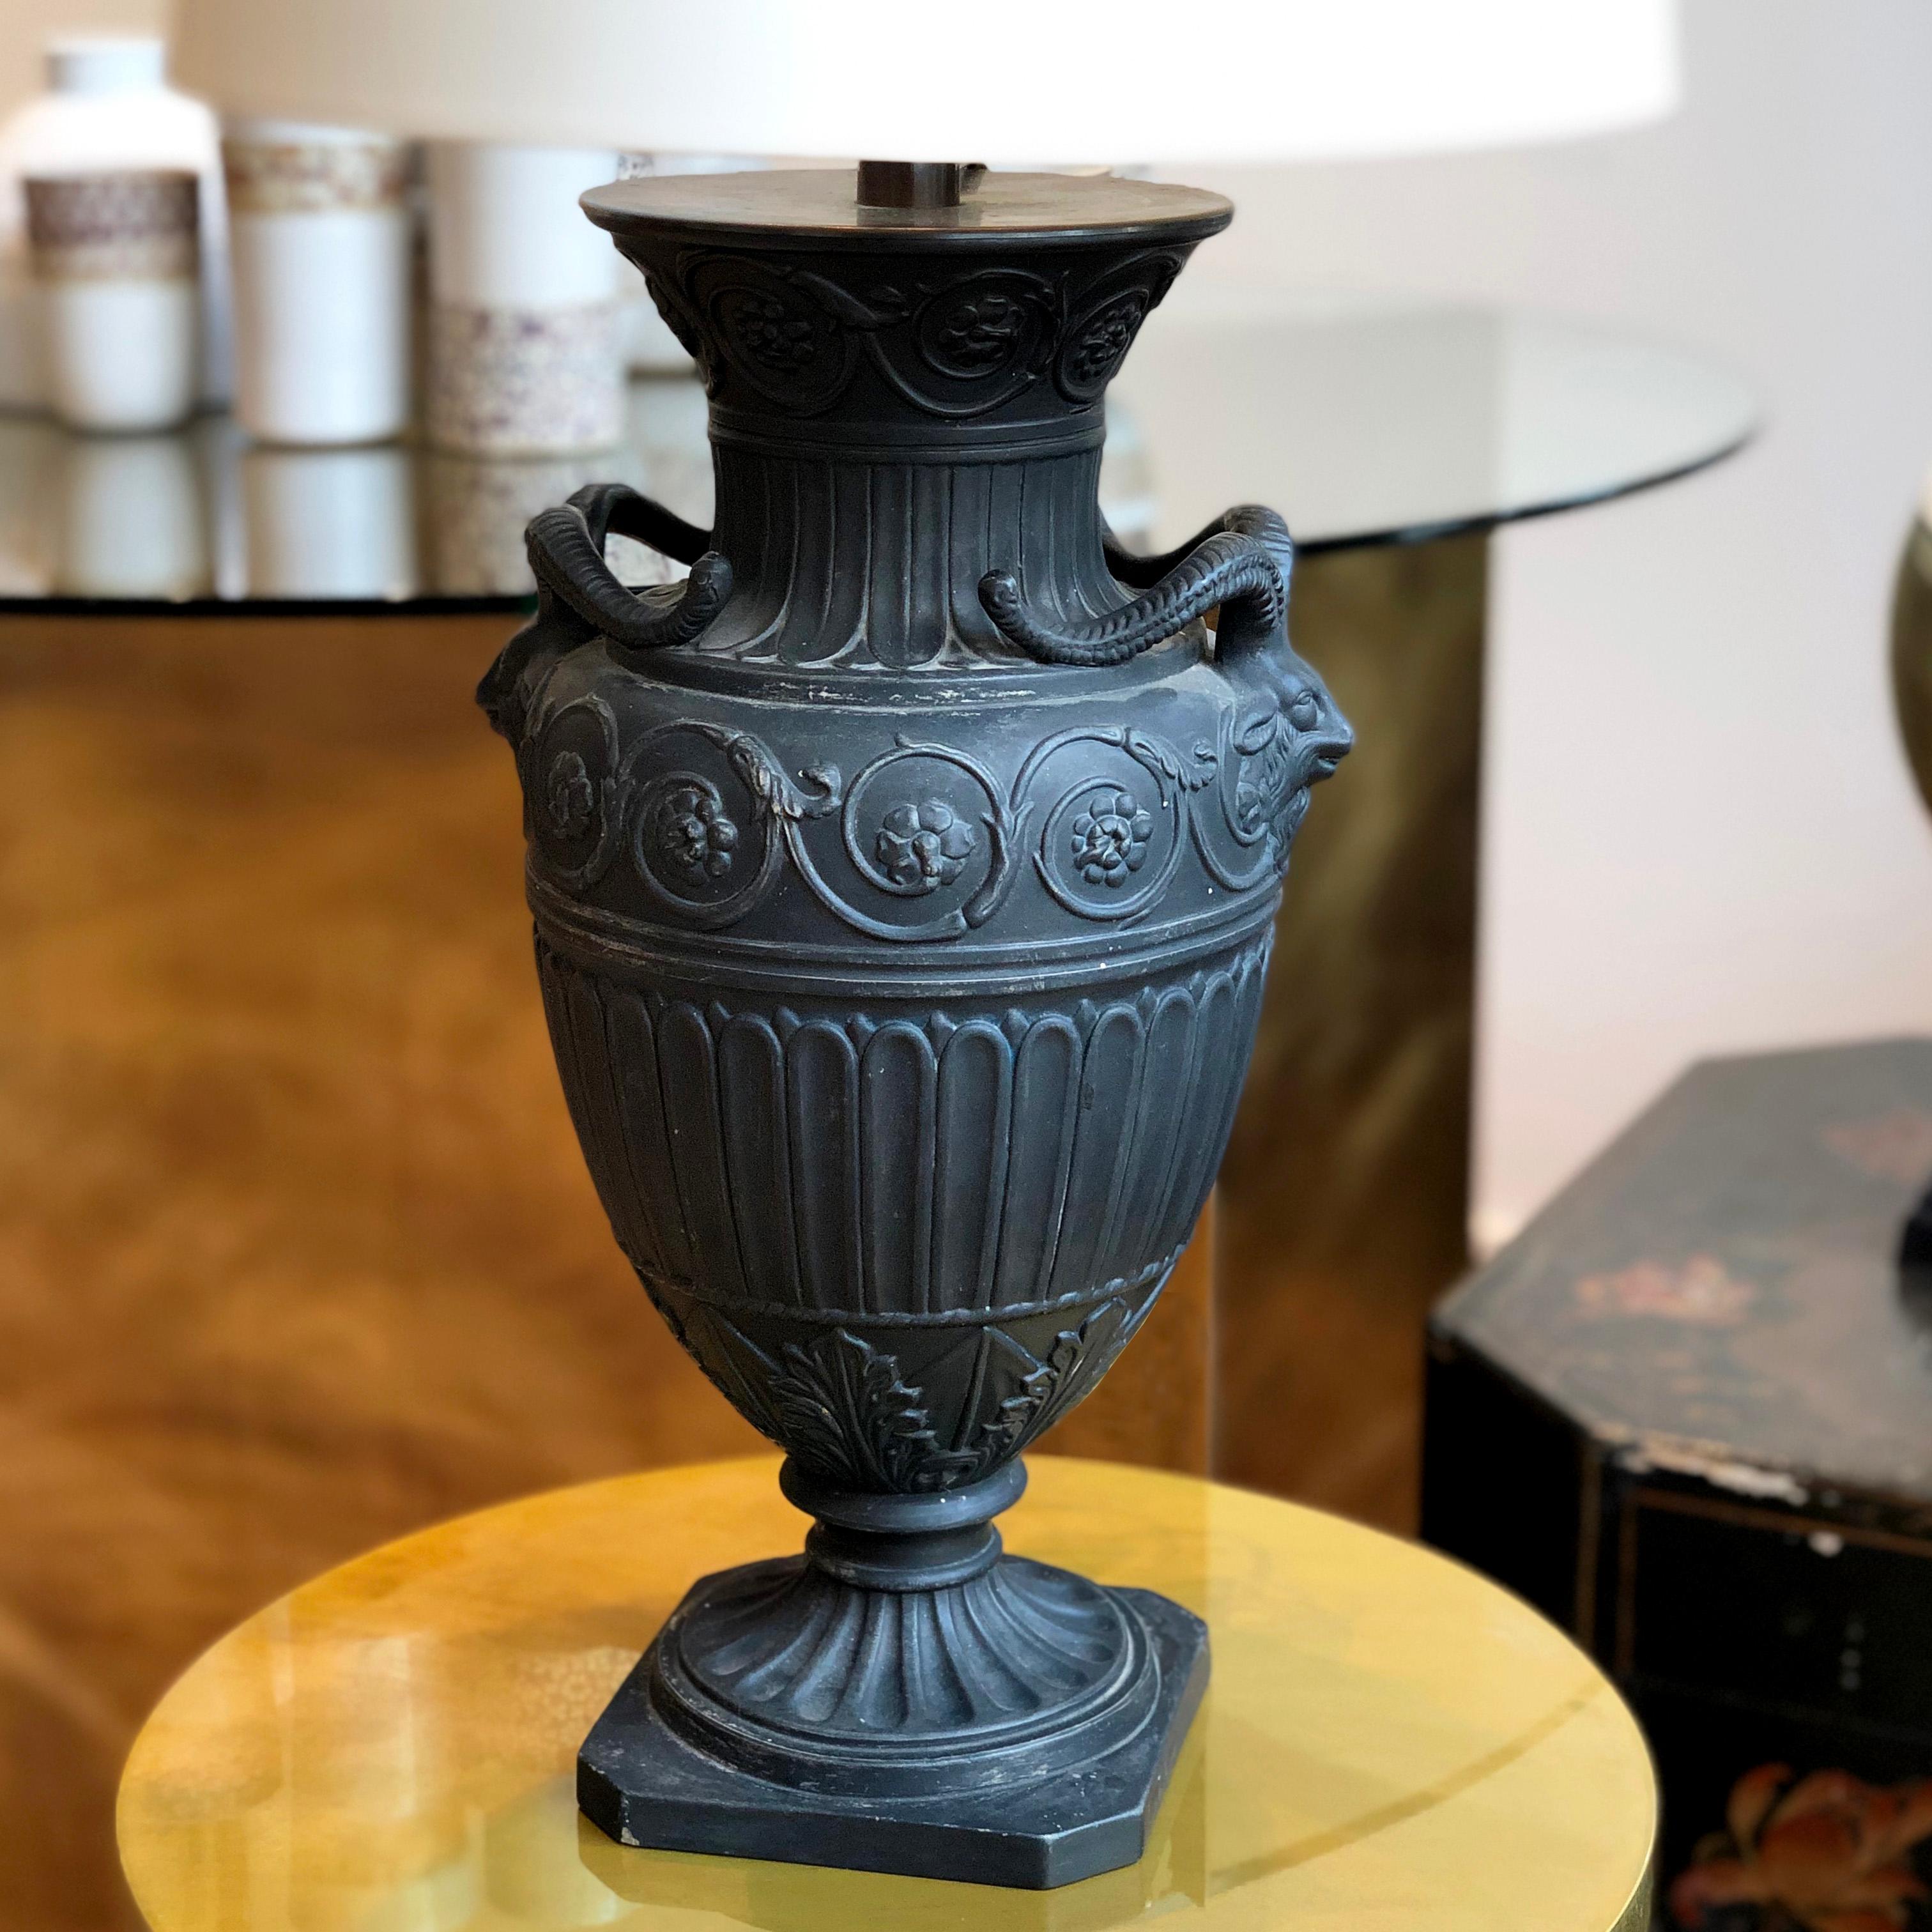 Basalt style amphora vase by Gerbing & Stephan Marks from the 1890s wired for a table lamp.

Measures: 20 diameter x 52 height cm

Good antique condition considering the age.